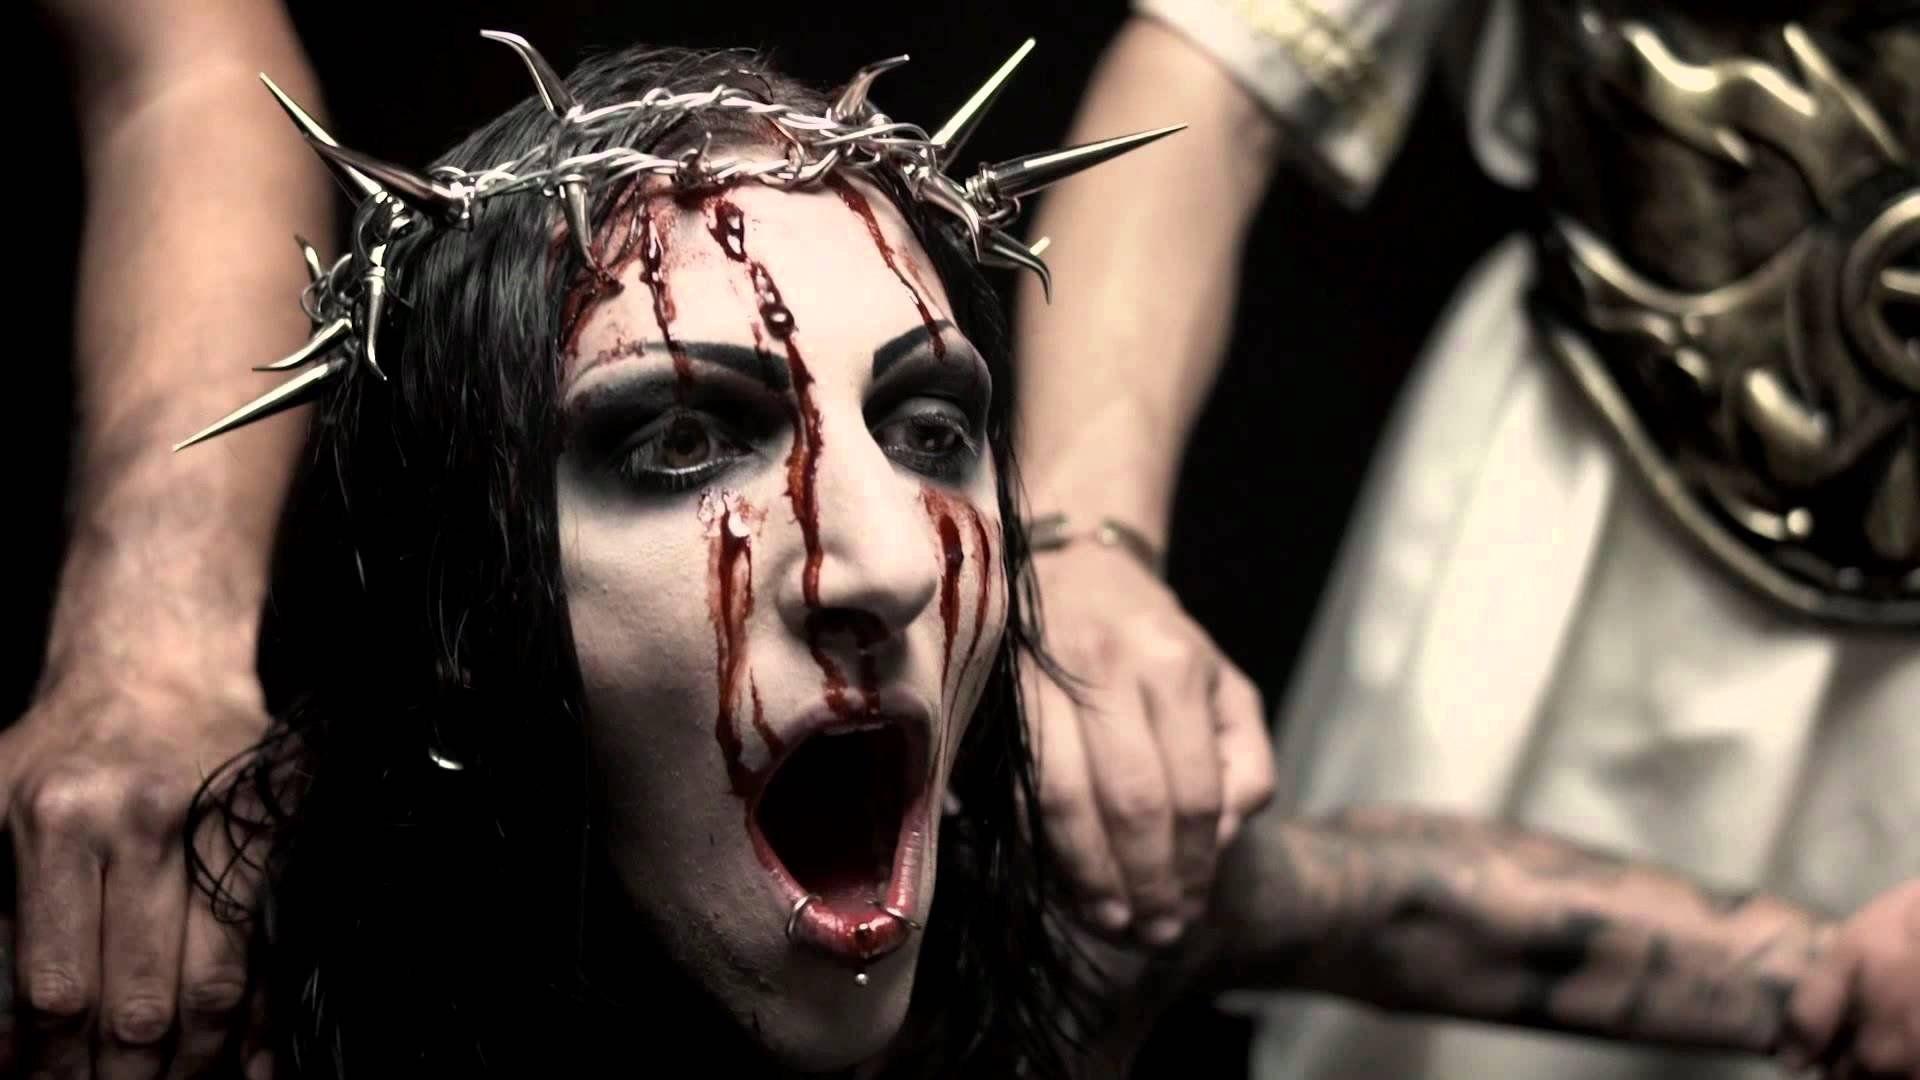 Motionless in White Wallpapers HD.